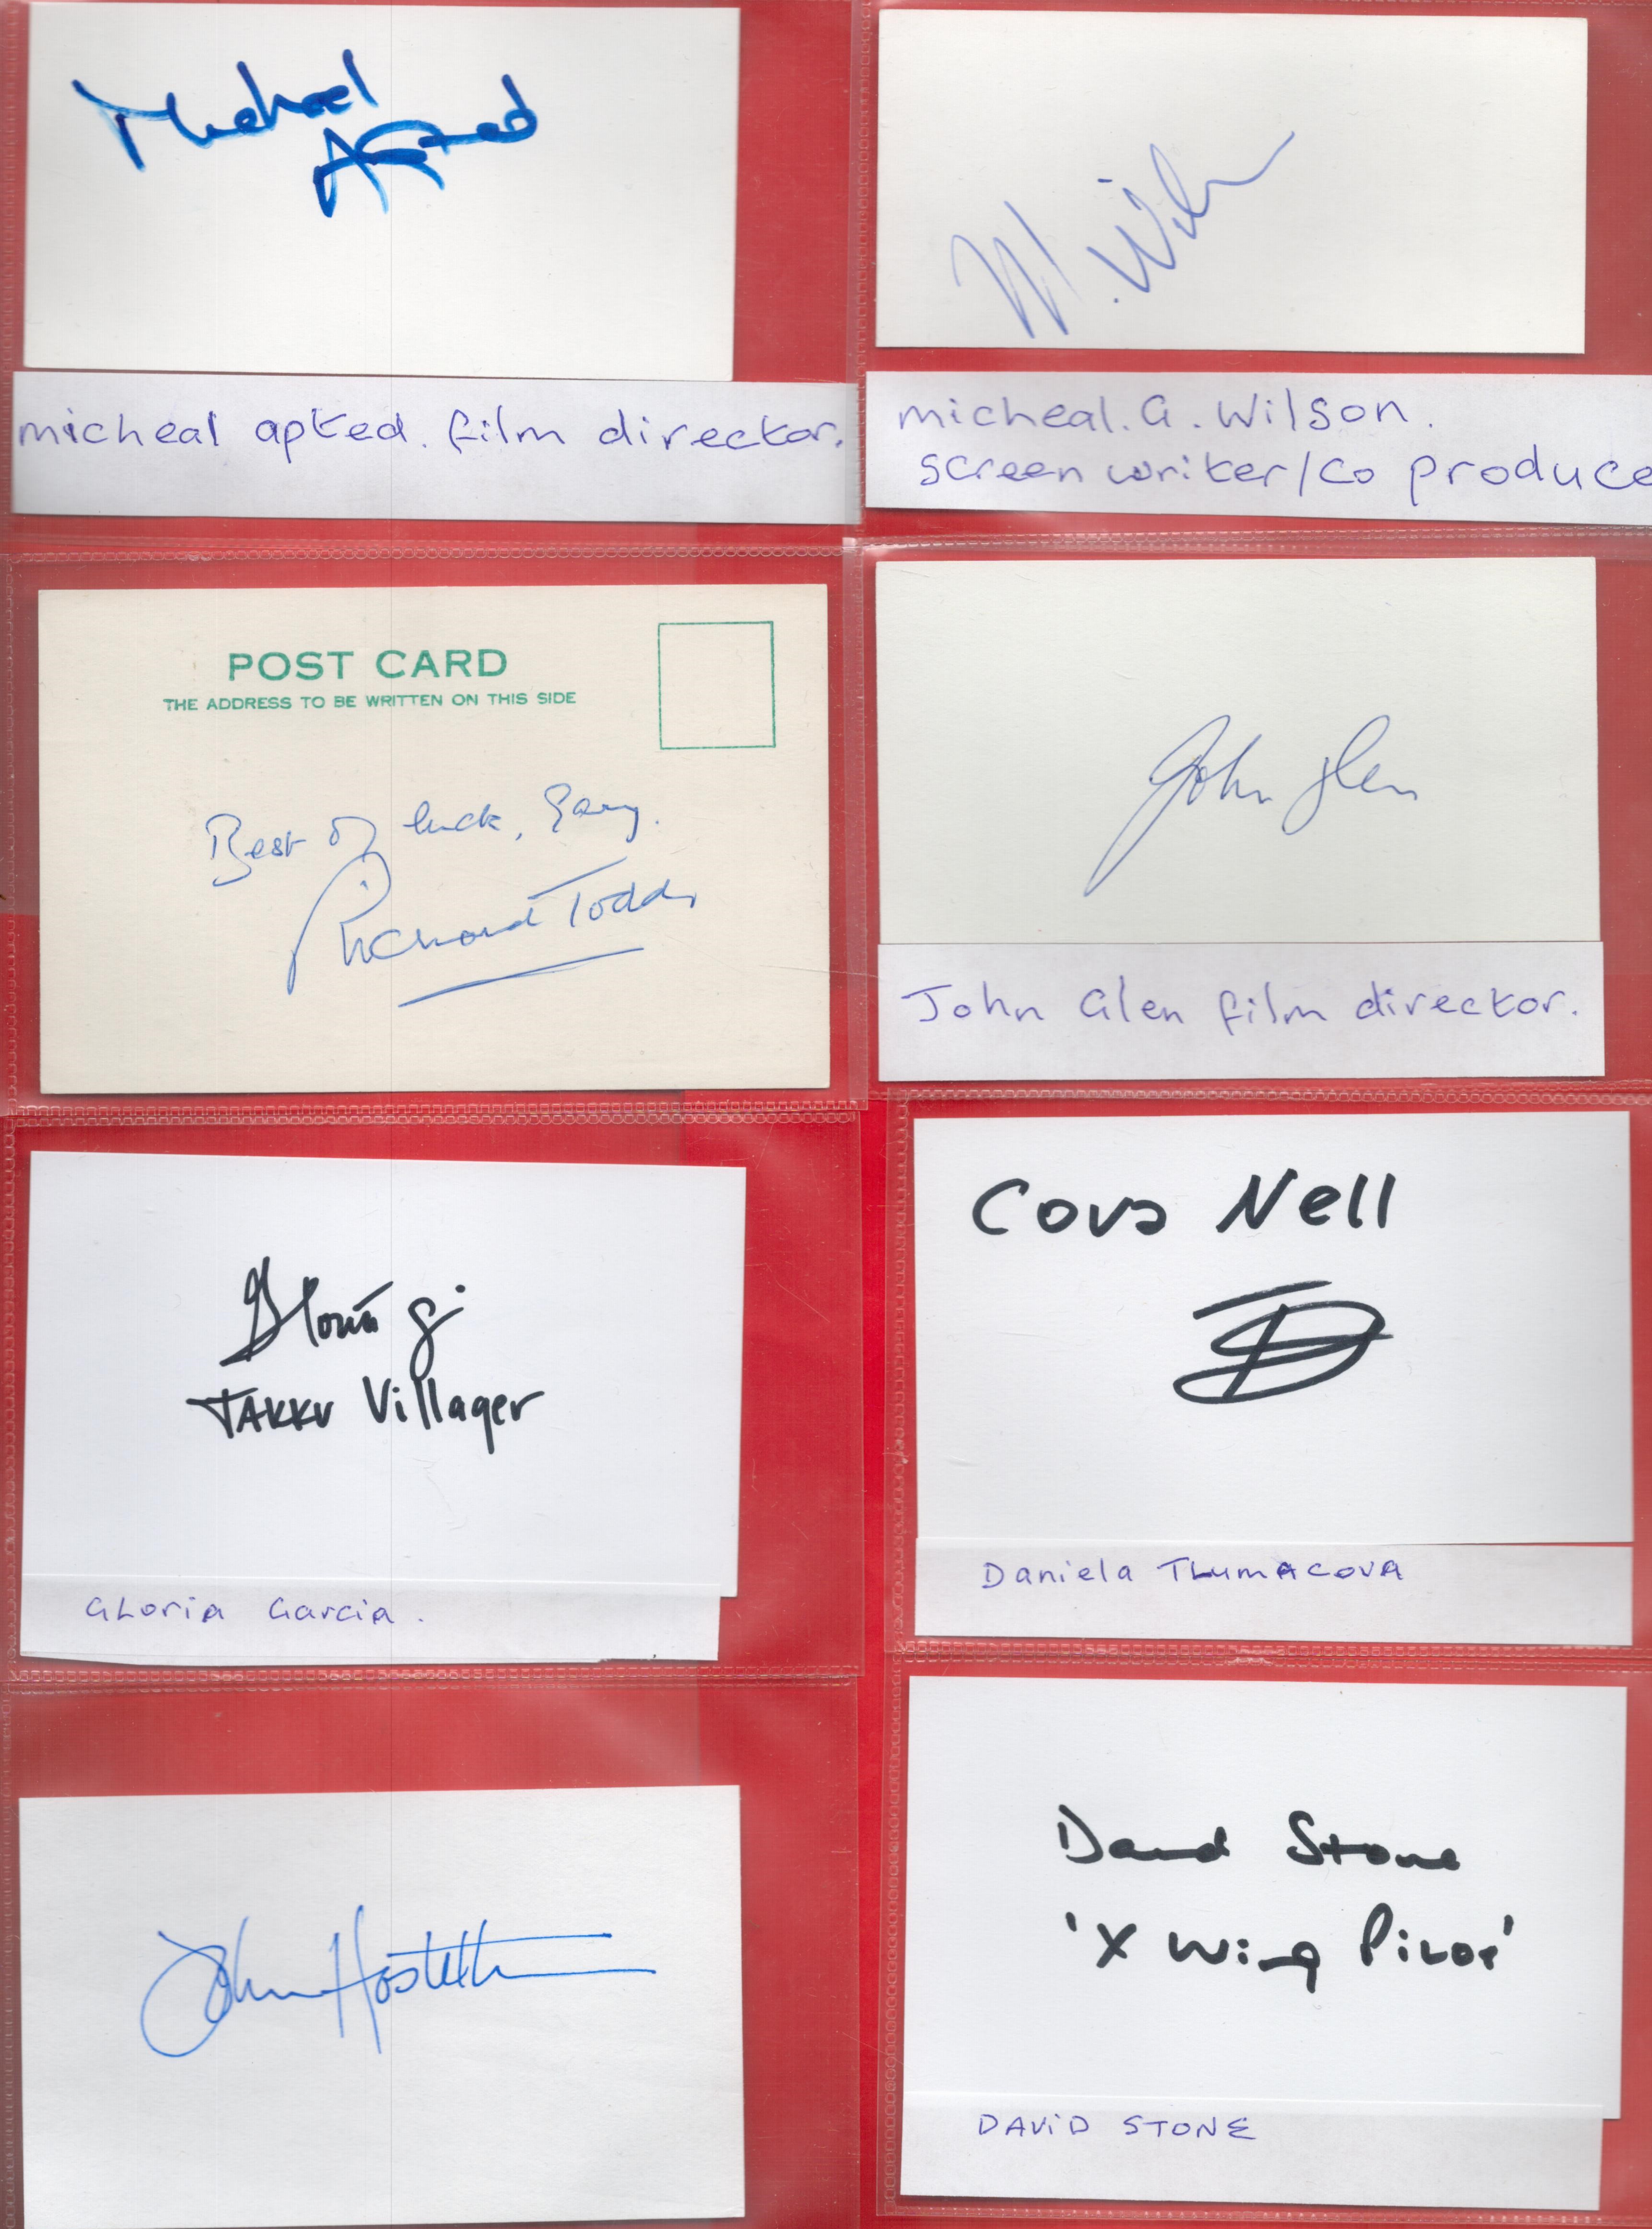 Autograph Collection of 12 Signatures on Signature Cards. Signatures including Richard Todd,